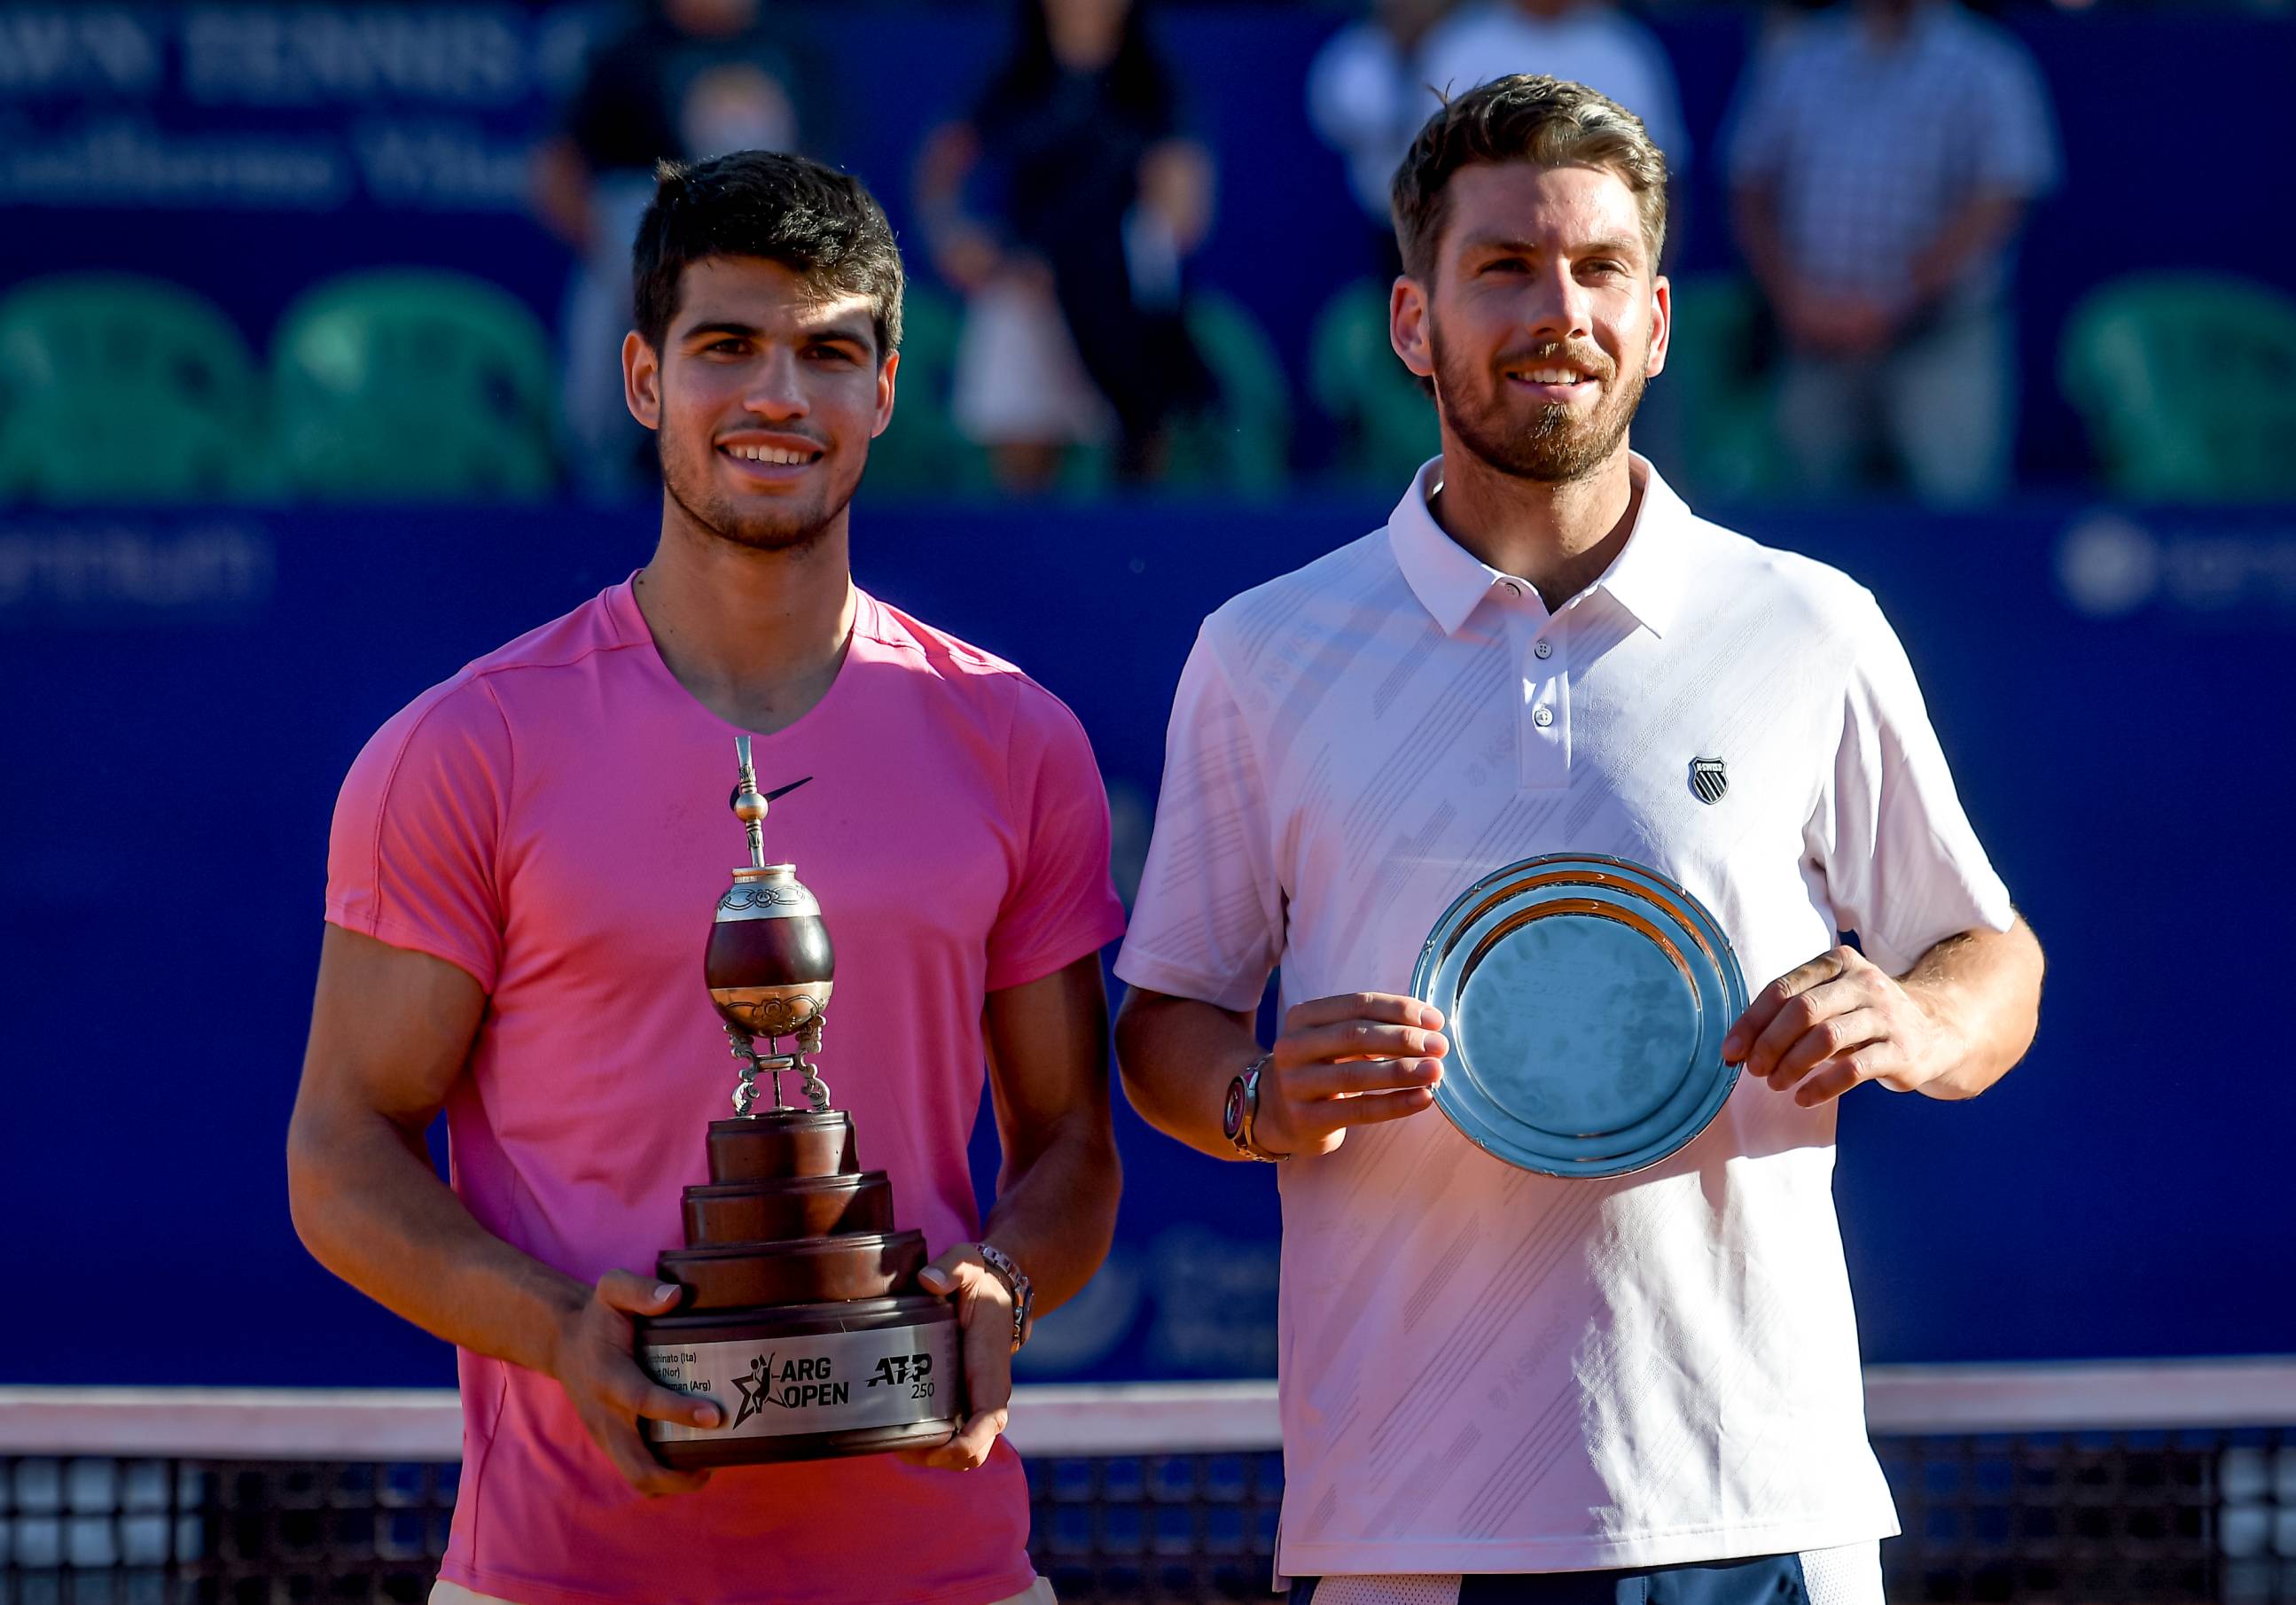 Norrie loses out to Alcaraz in Argentina final, while Hewett, Reid and Clarke headline five British titles LTA